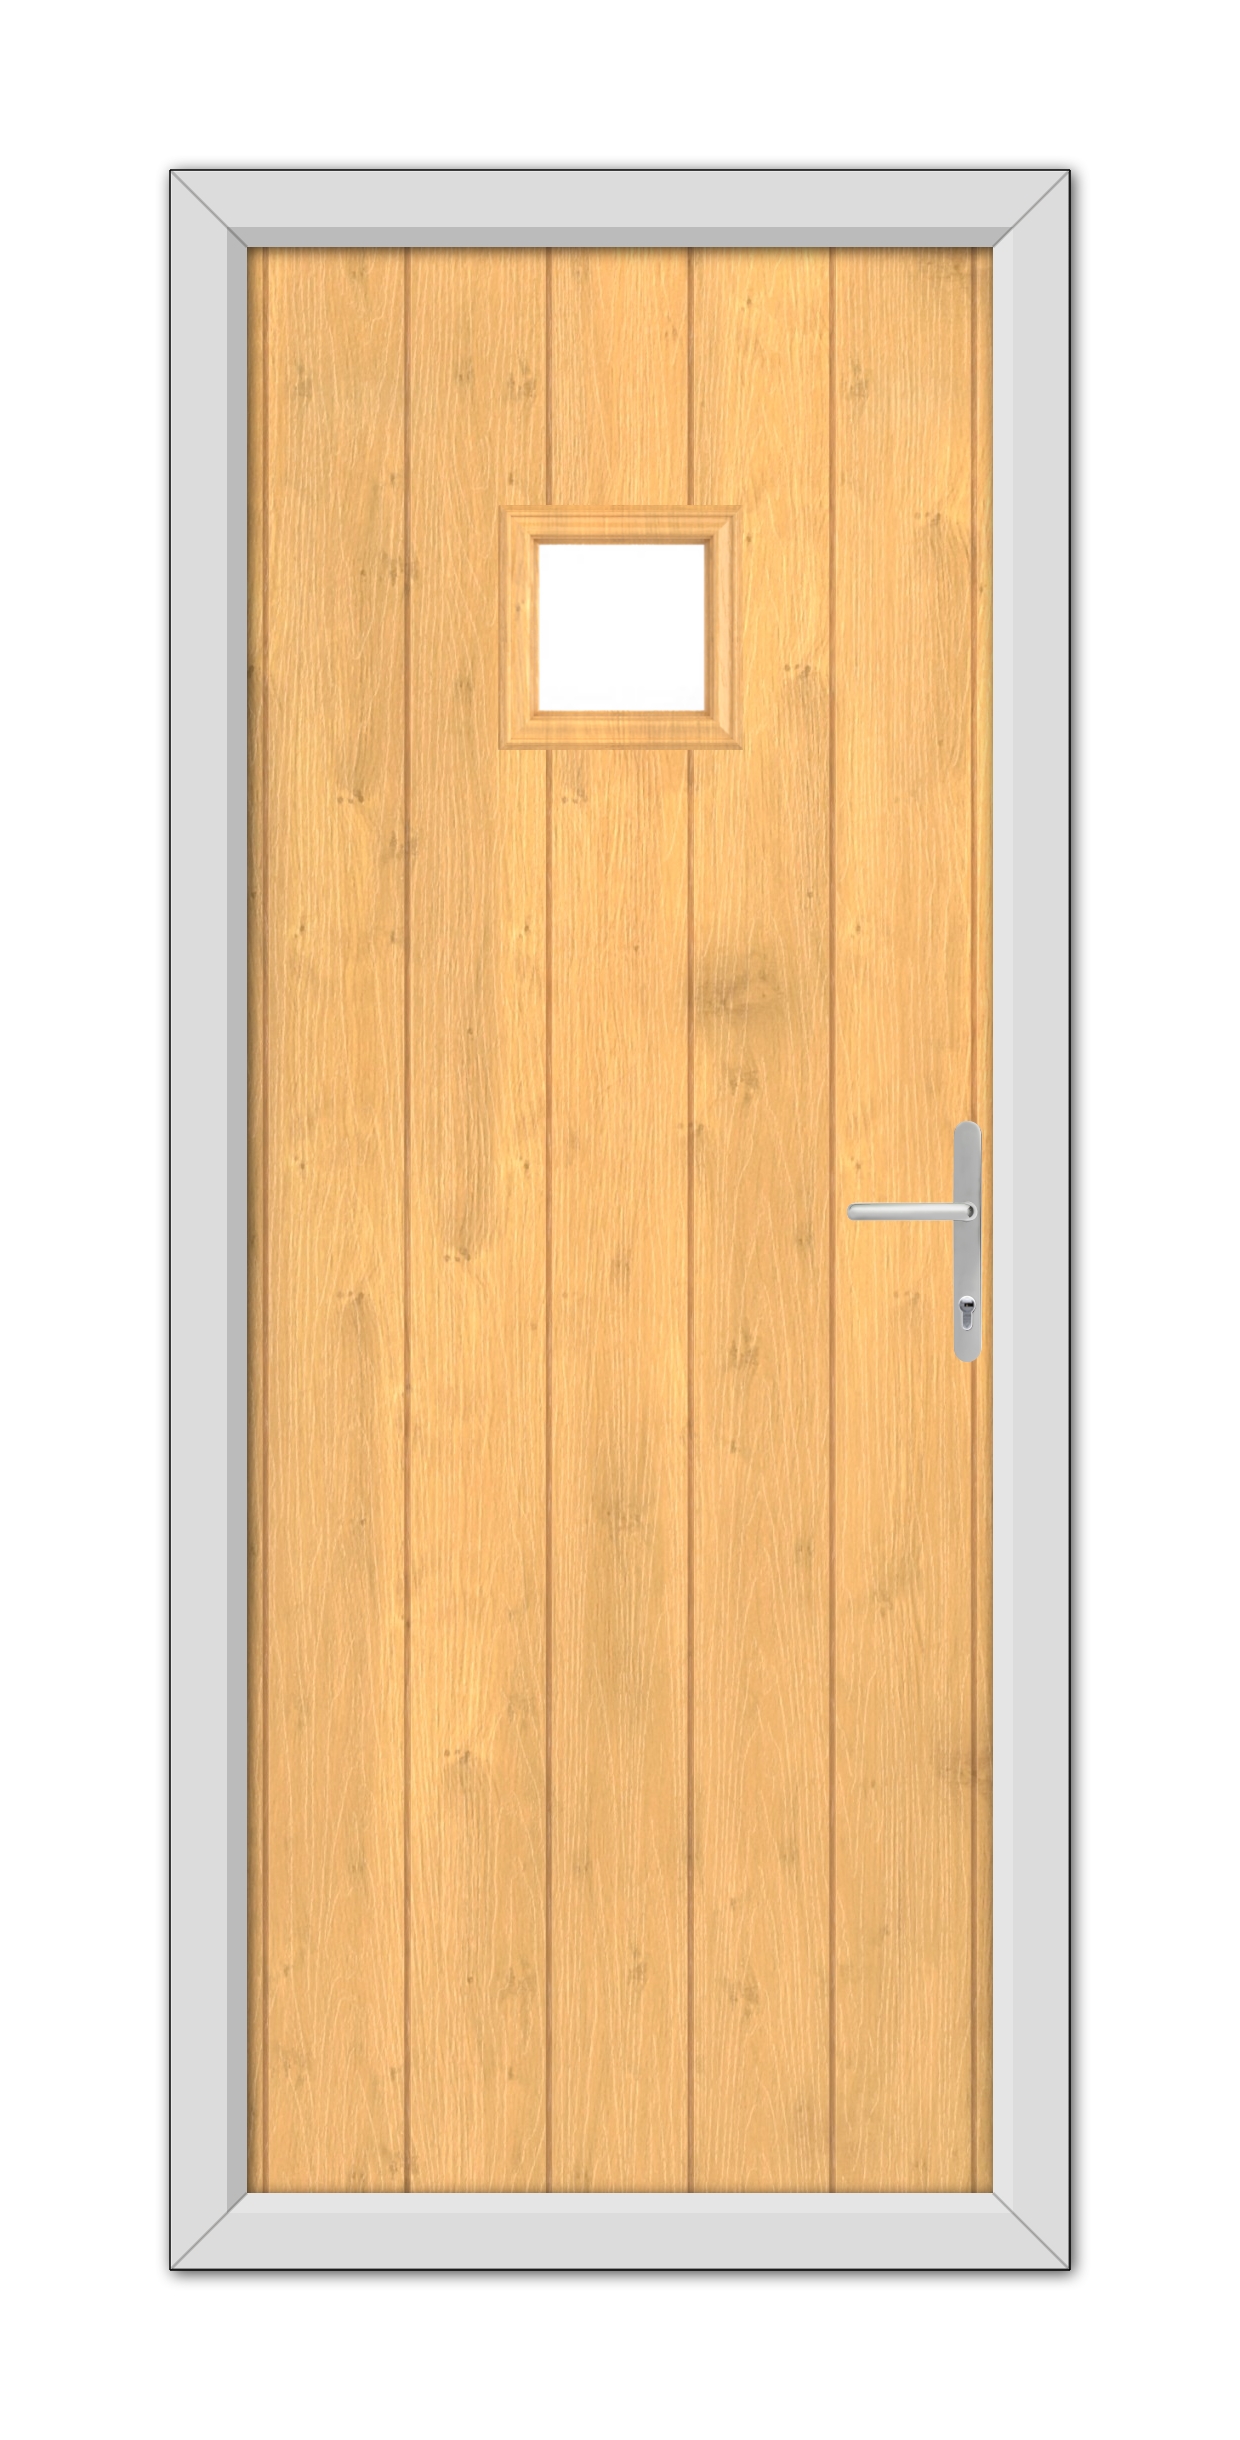 A modern Irish Oak Brampton Composite Door with a small square window, set in a gray frame, featuring a metal handle on the right side.